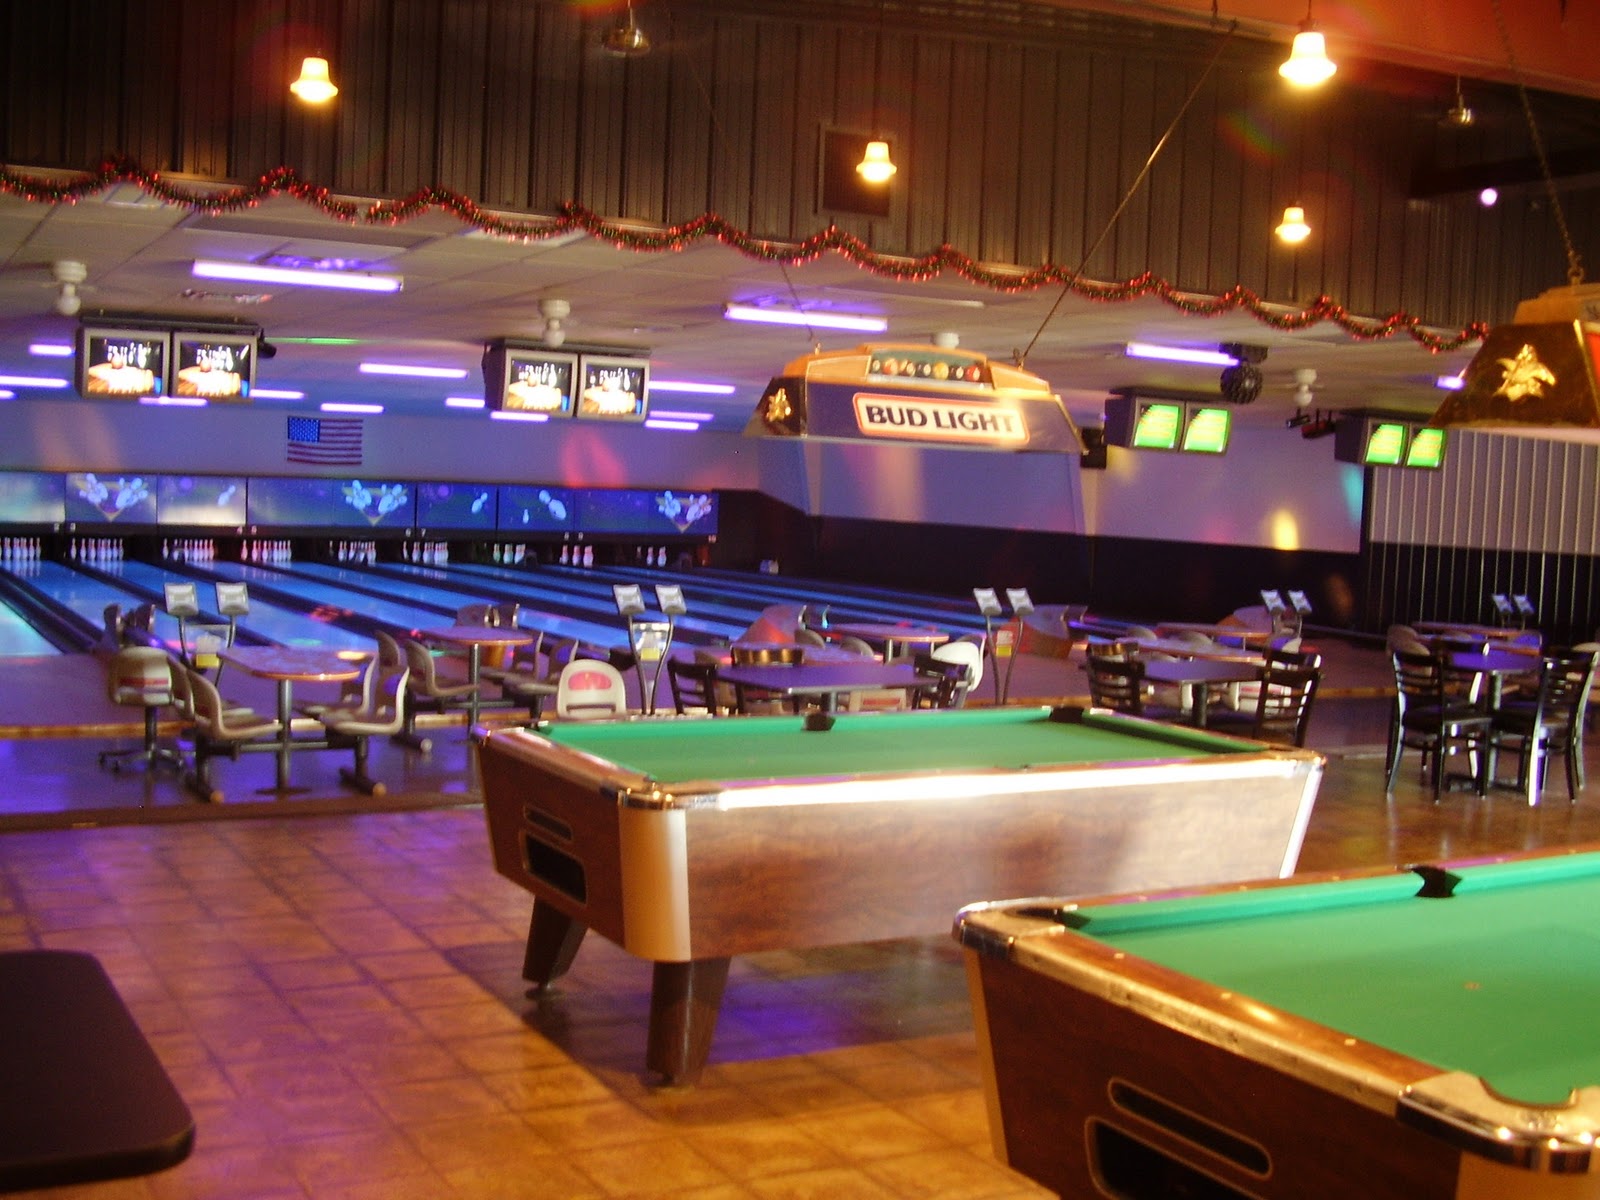 Mid America Live Renovation Puts Bowling Center In The New Millennium